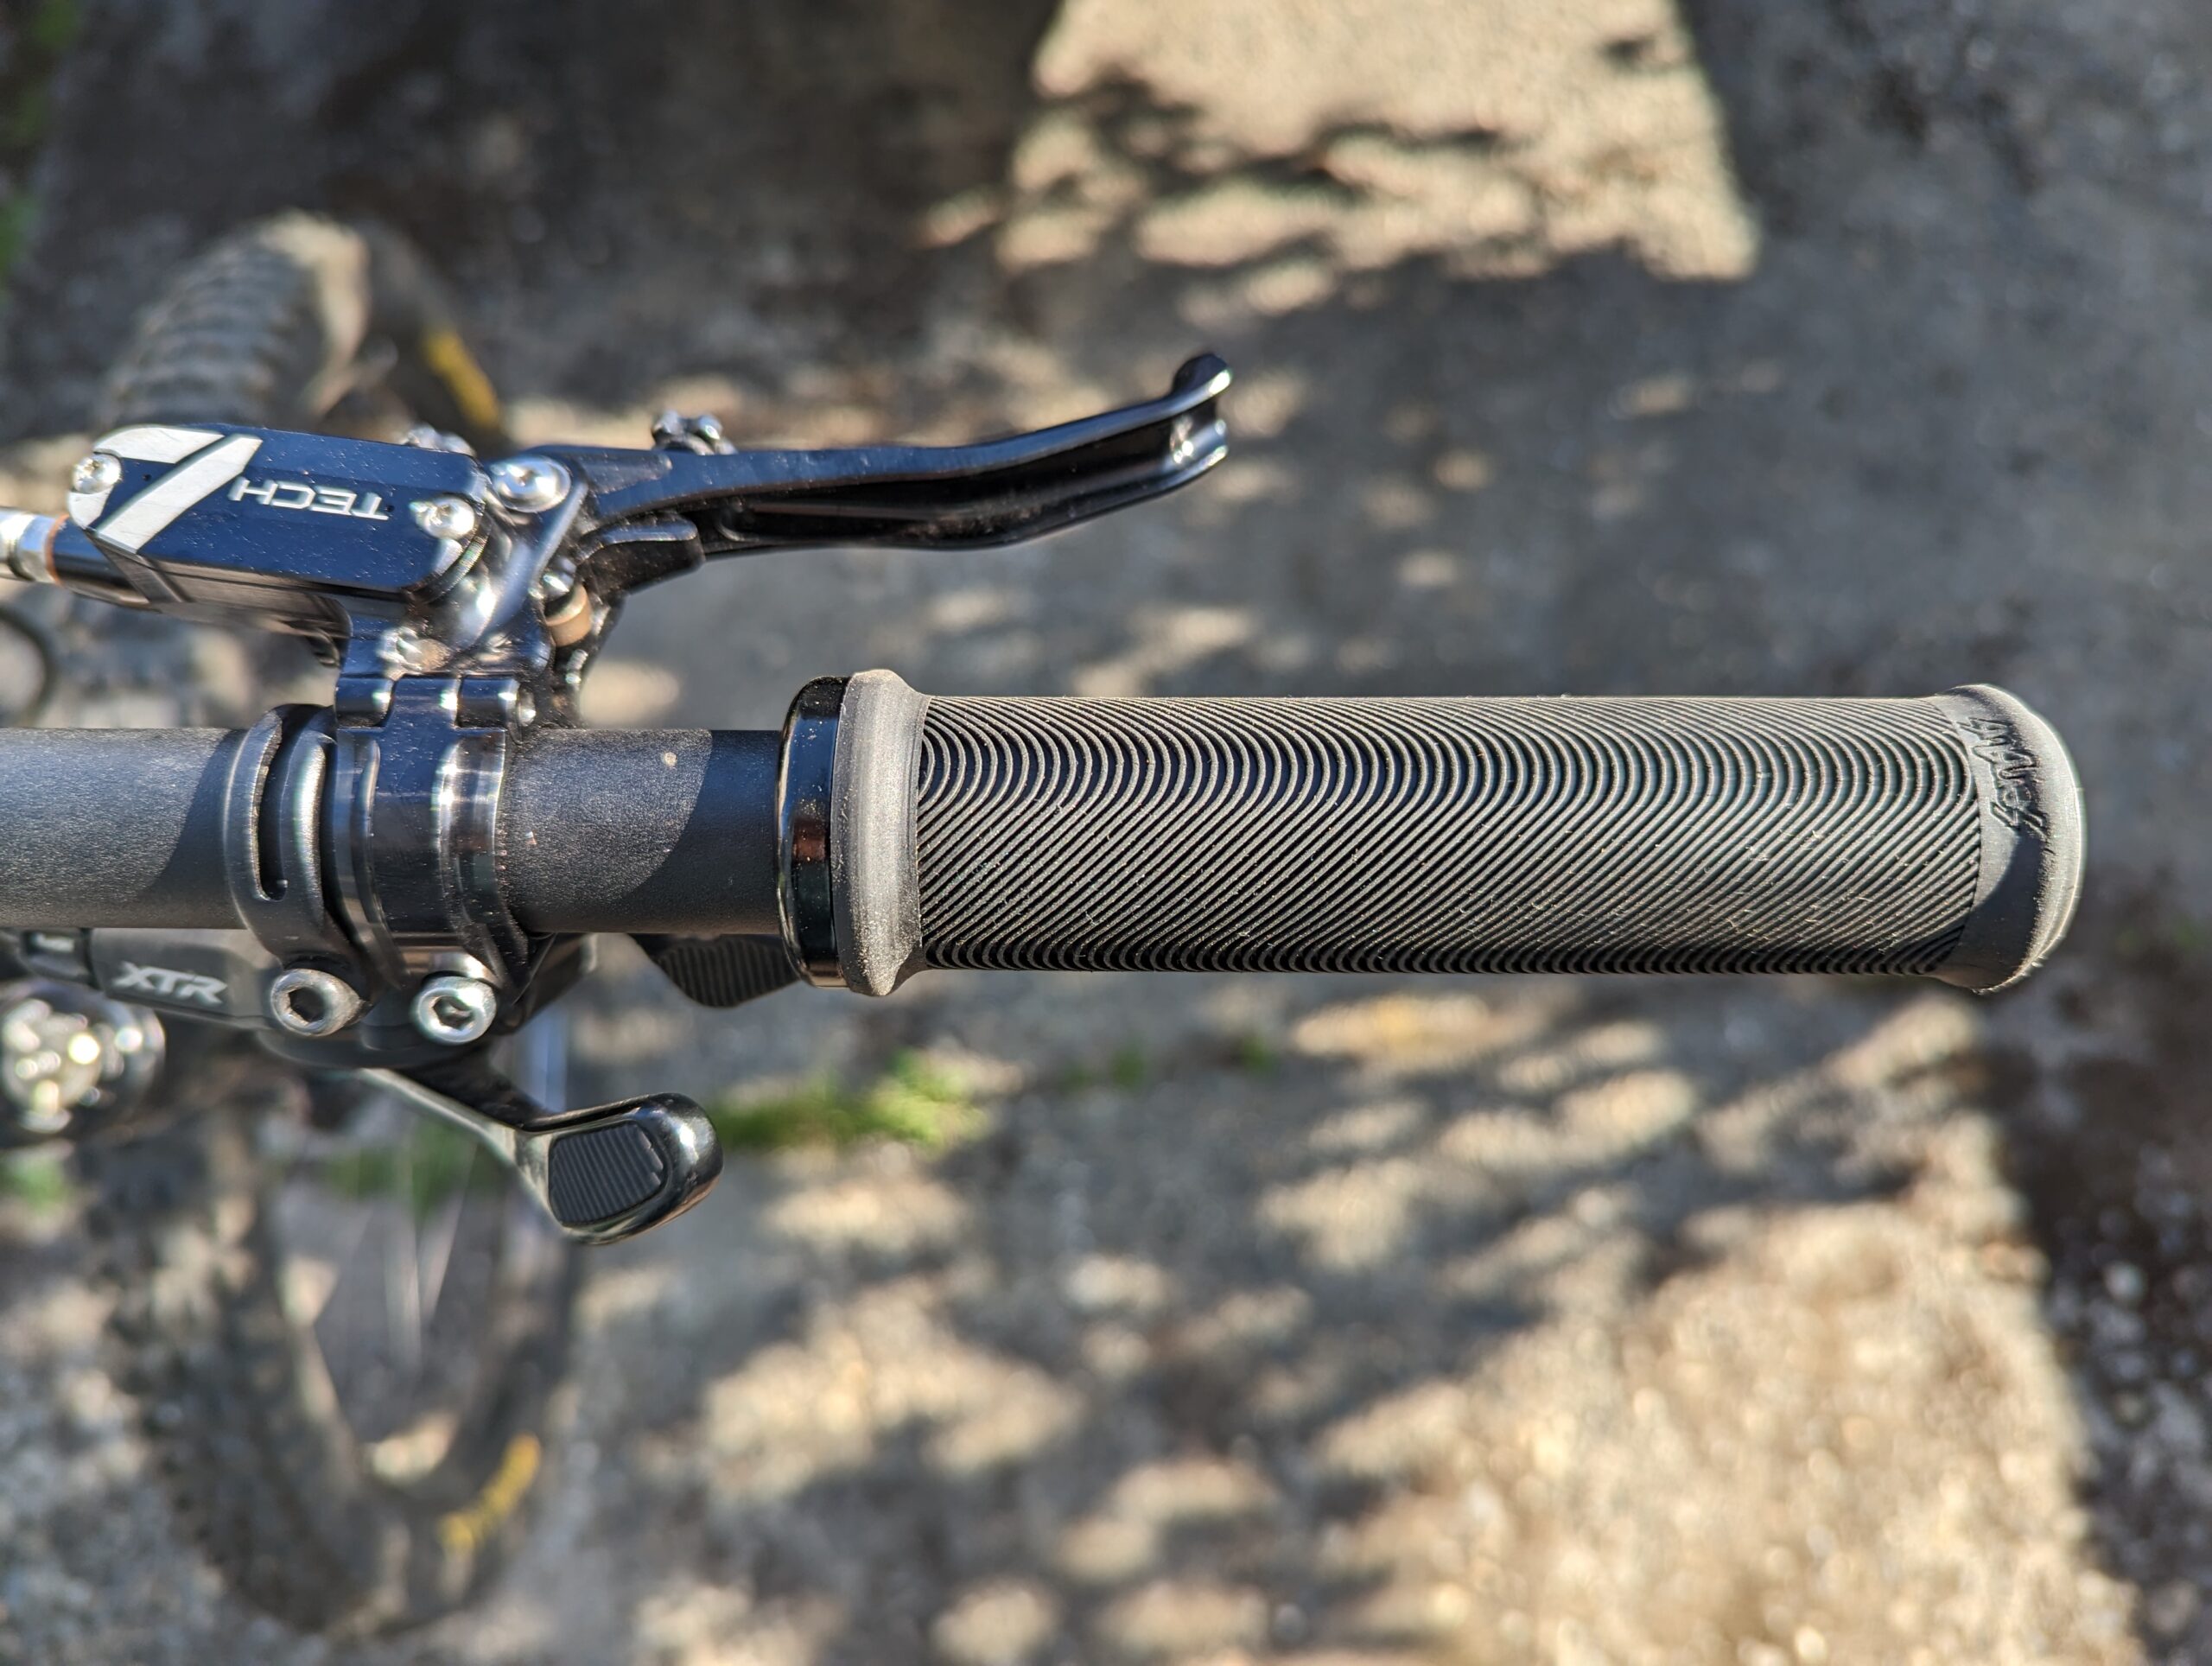 David Golay reviews the Sensus Lite Grips for BLISTER.